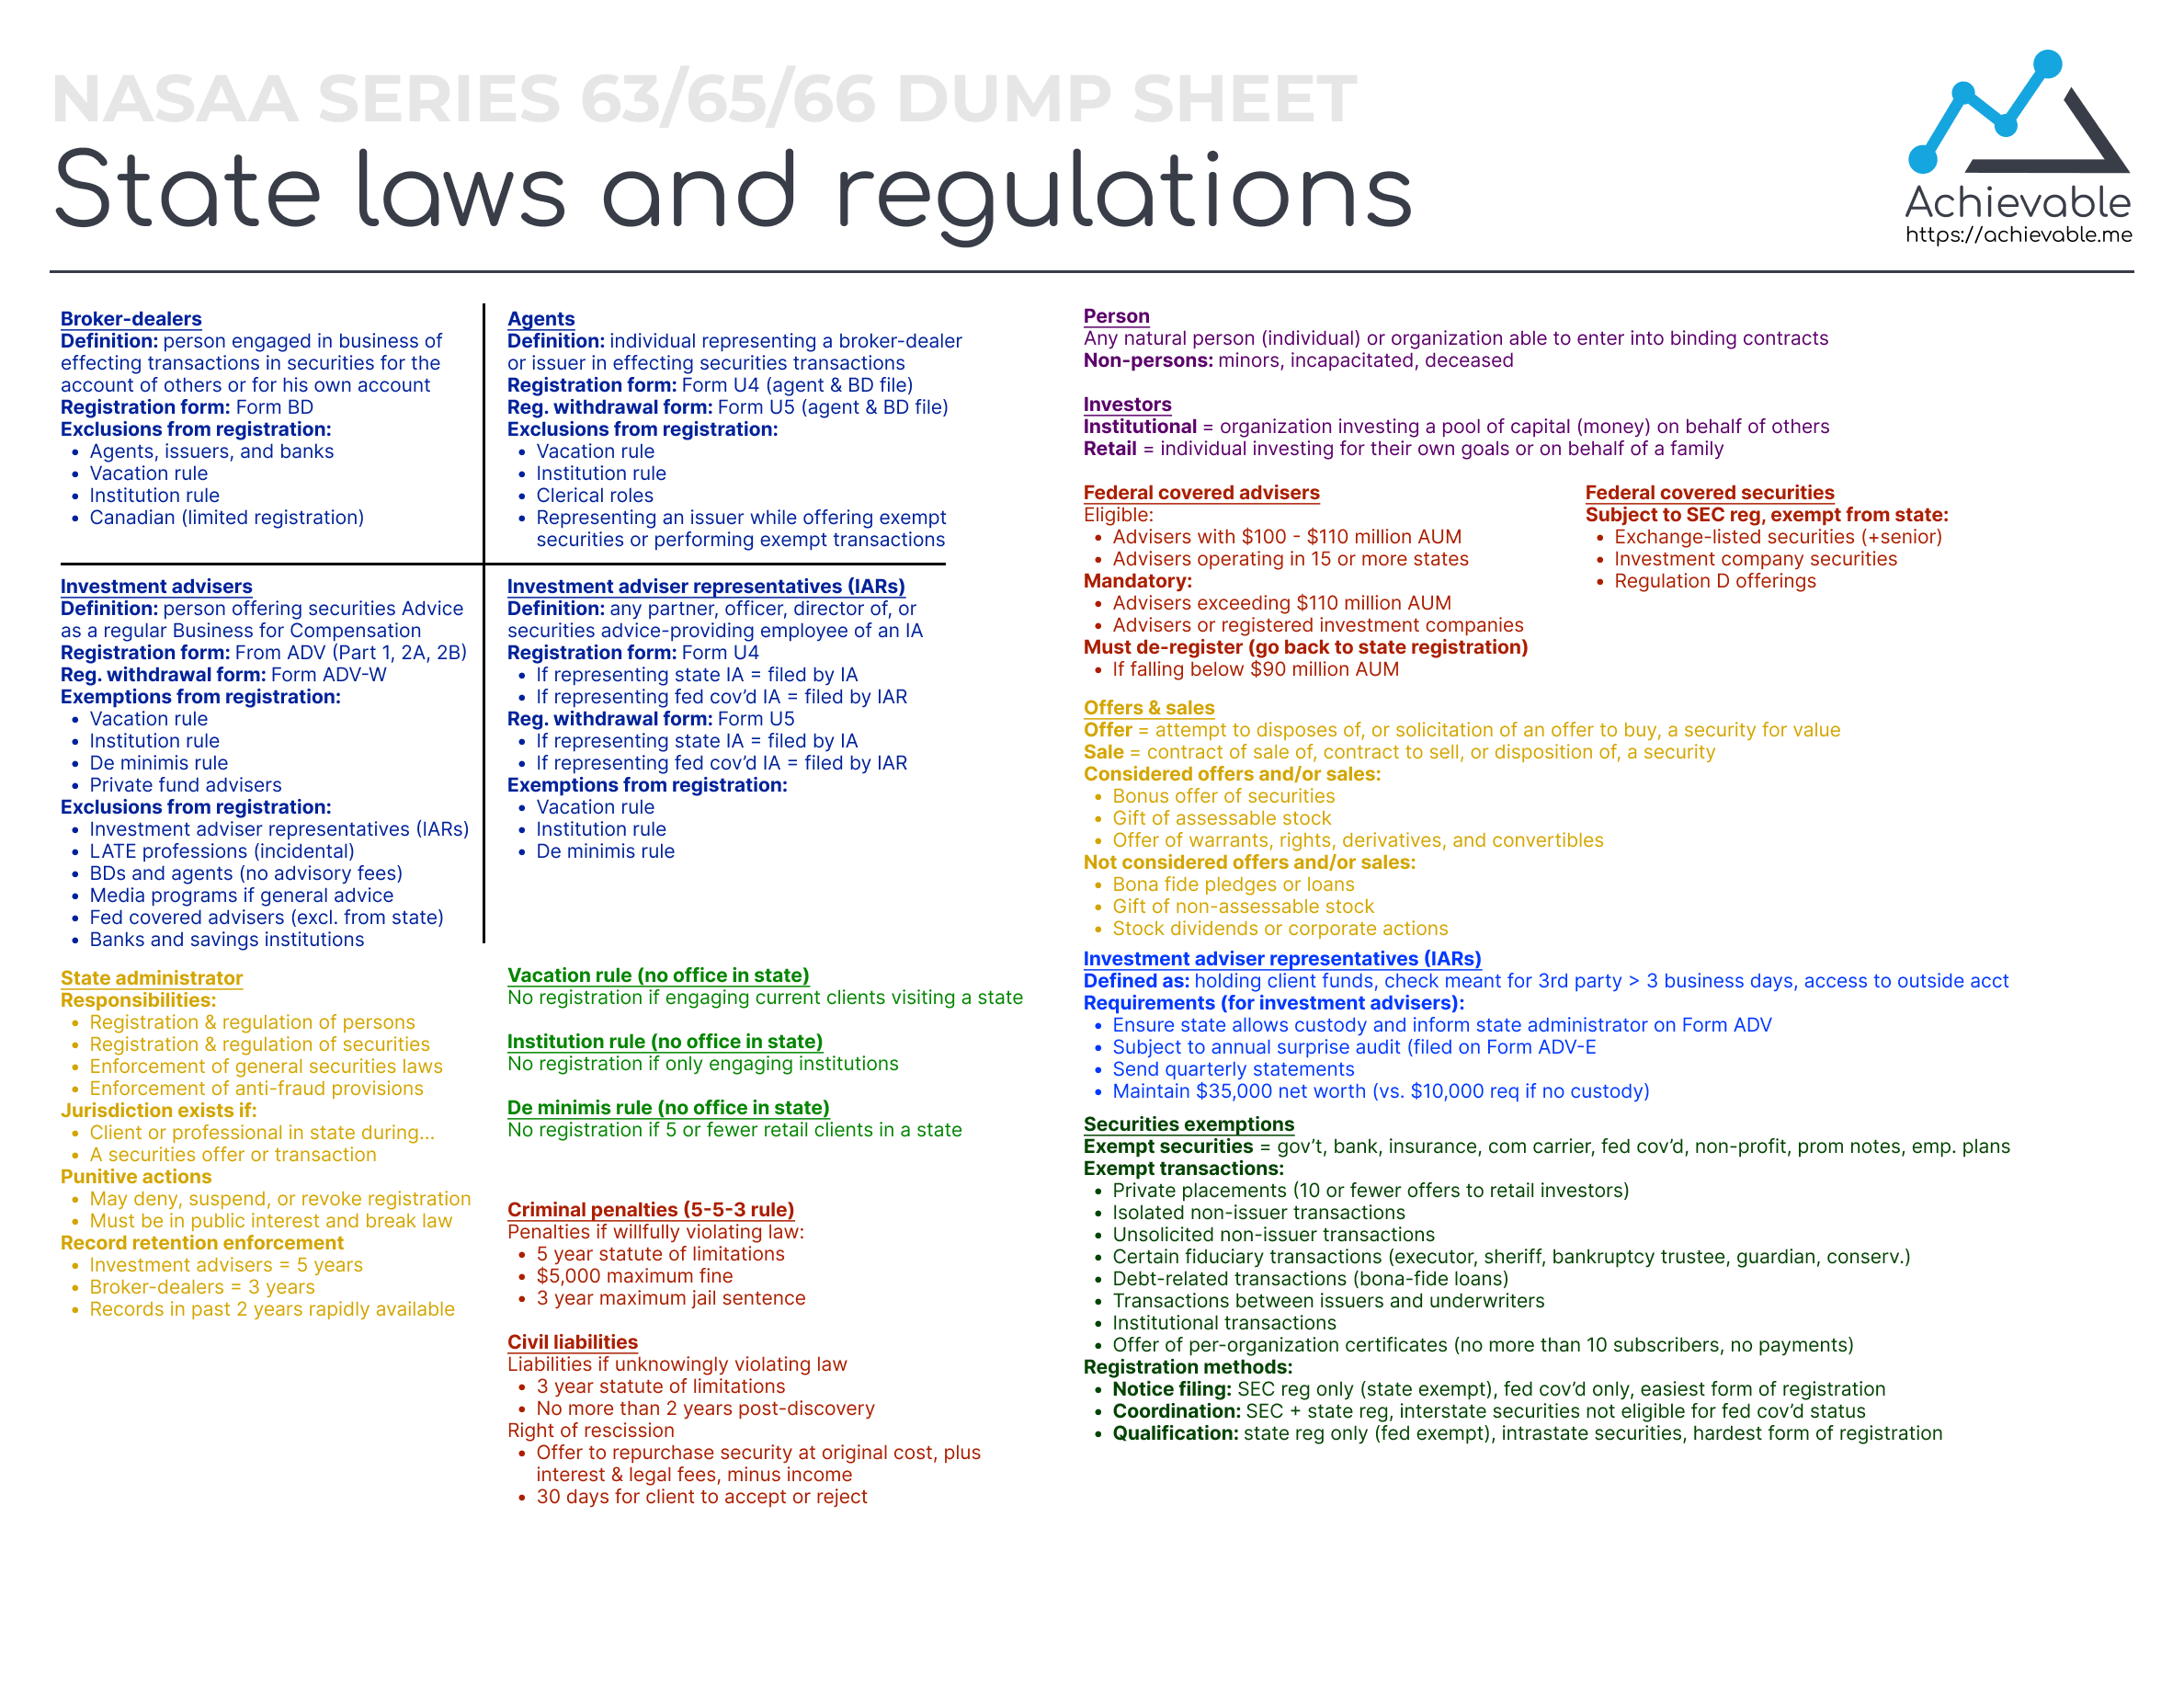 Series 66 Dump Sheet - State Laws and Regulations